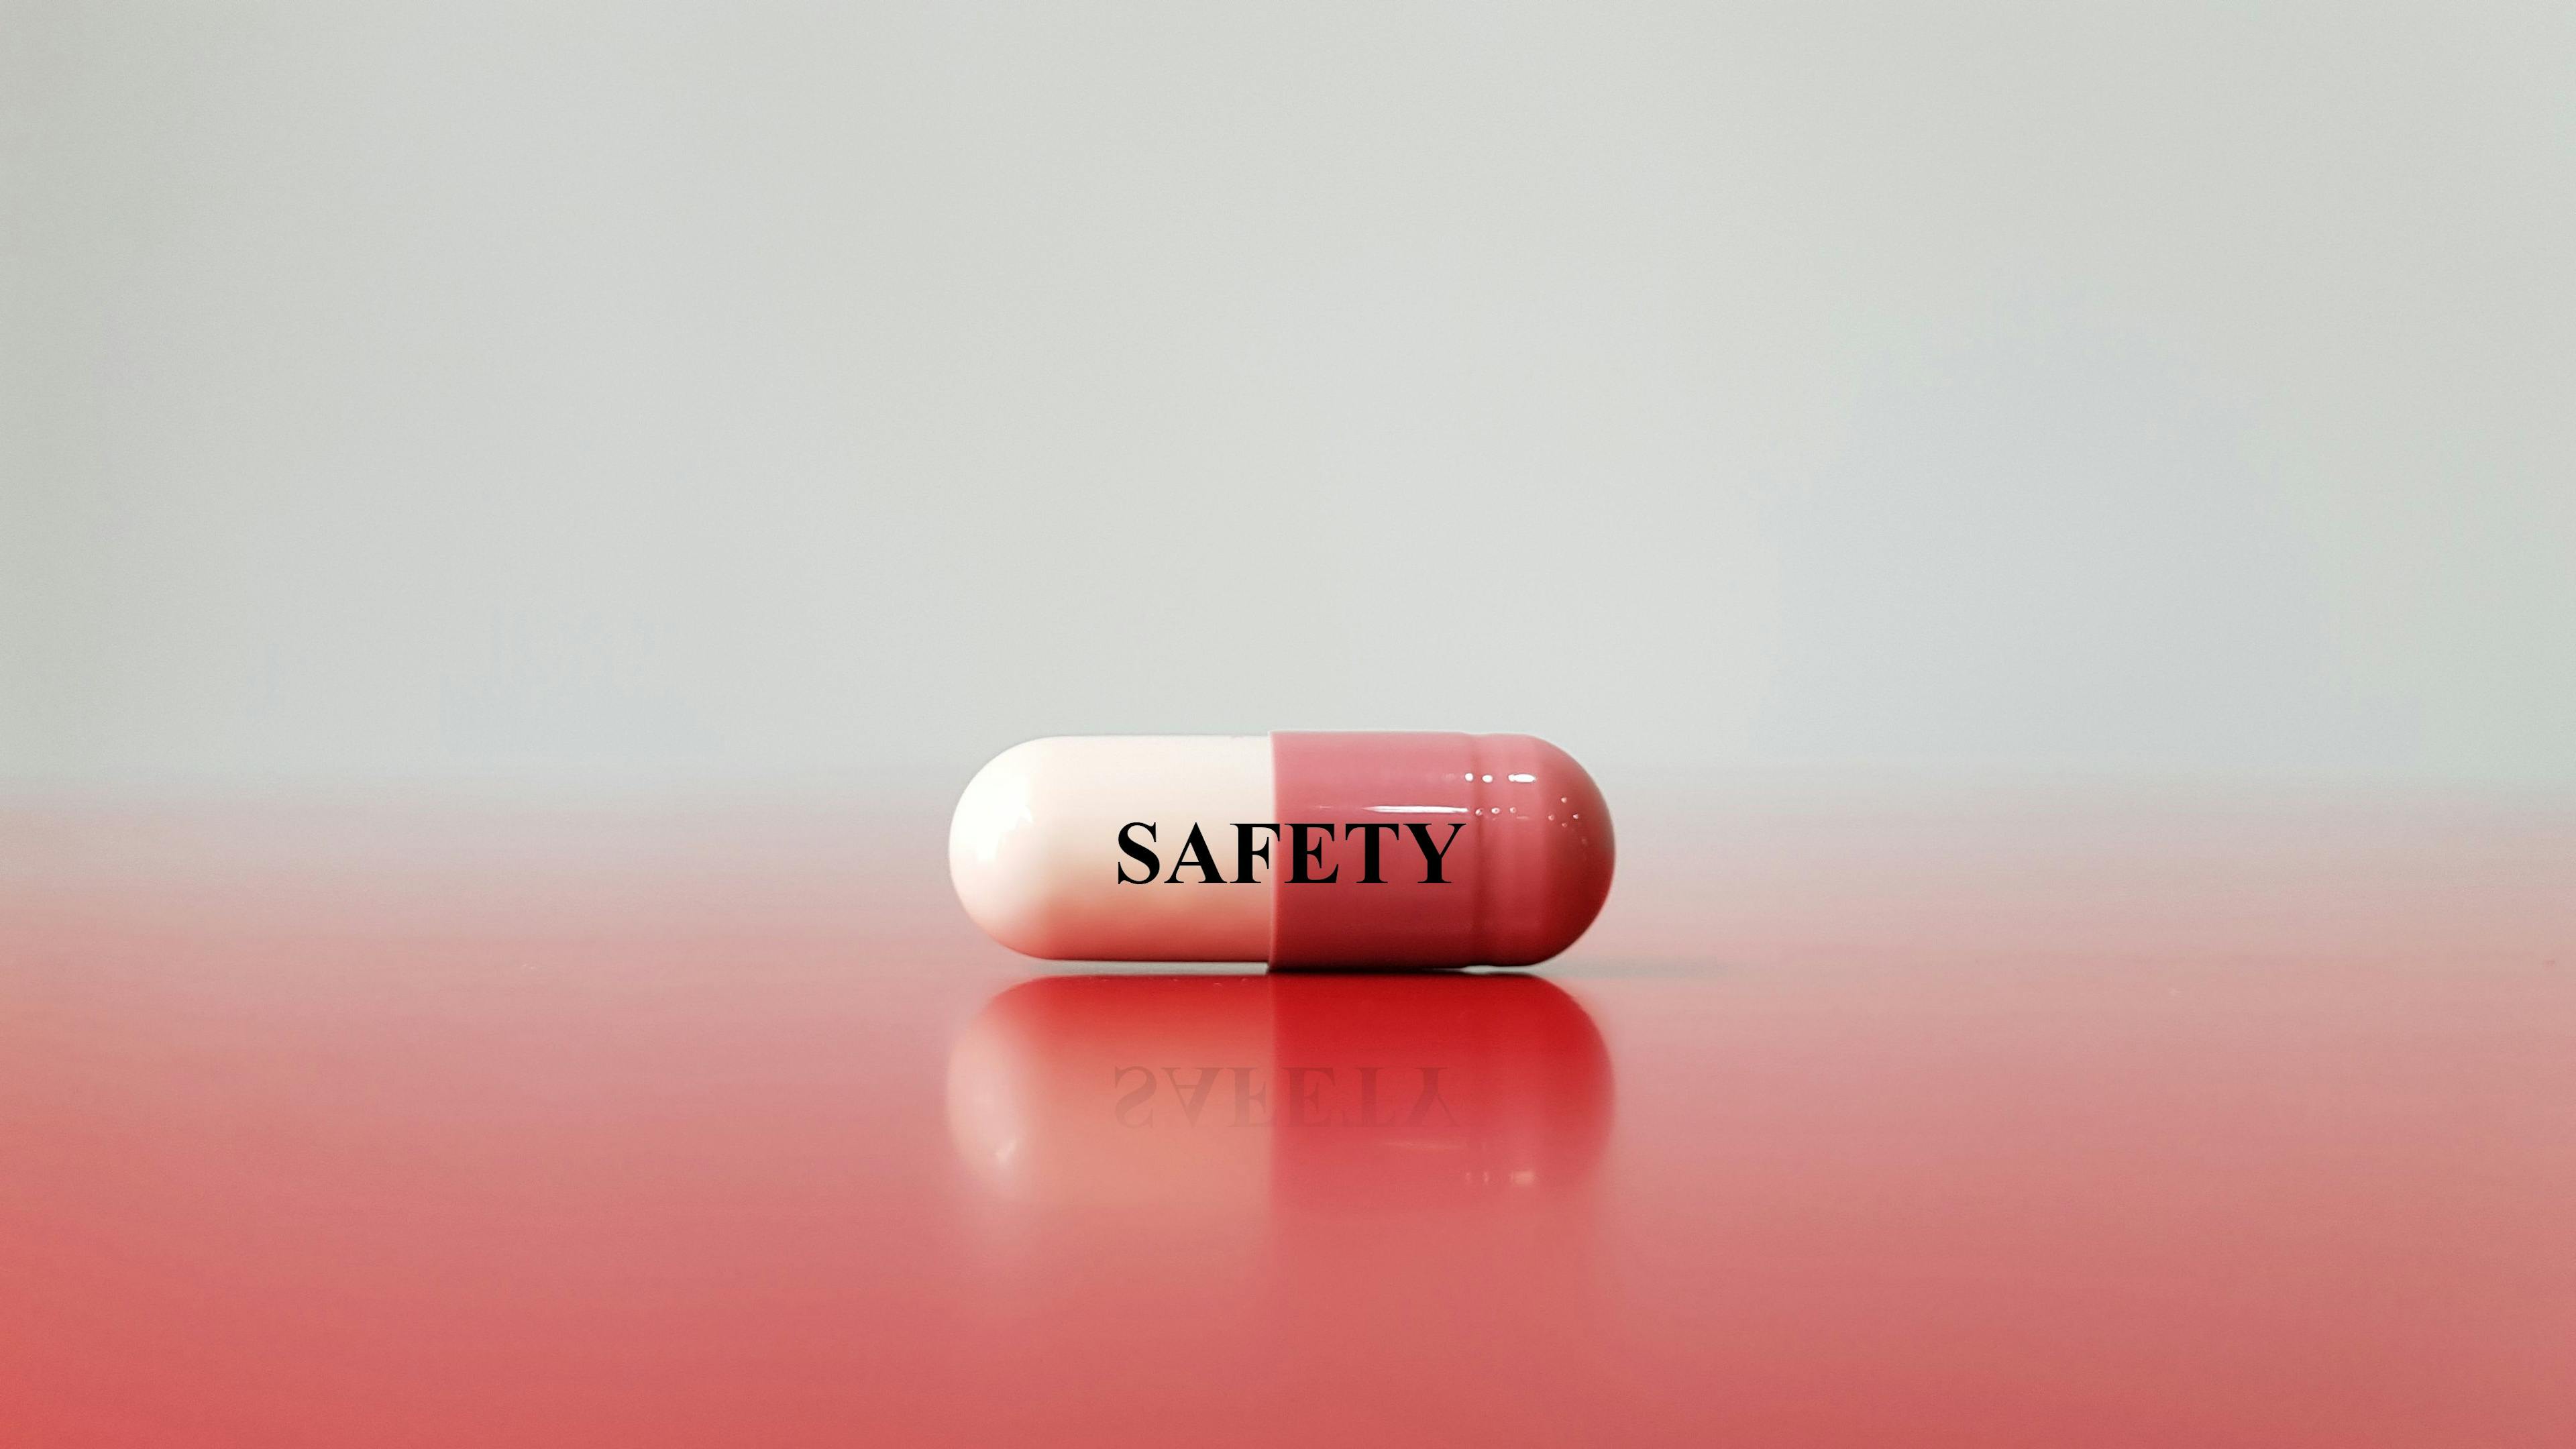 Pharmacovigilance (PV or PhV), also known as drug safety, is the pharmacological science to detection, monitoring, and prevention of adverse effects with pharmaceutical product. Medical safety concept - Image credit: Joel bubble ben | stock.adobe.com